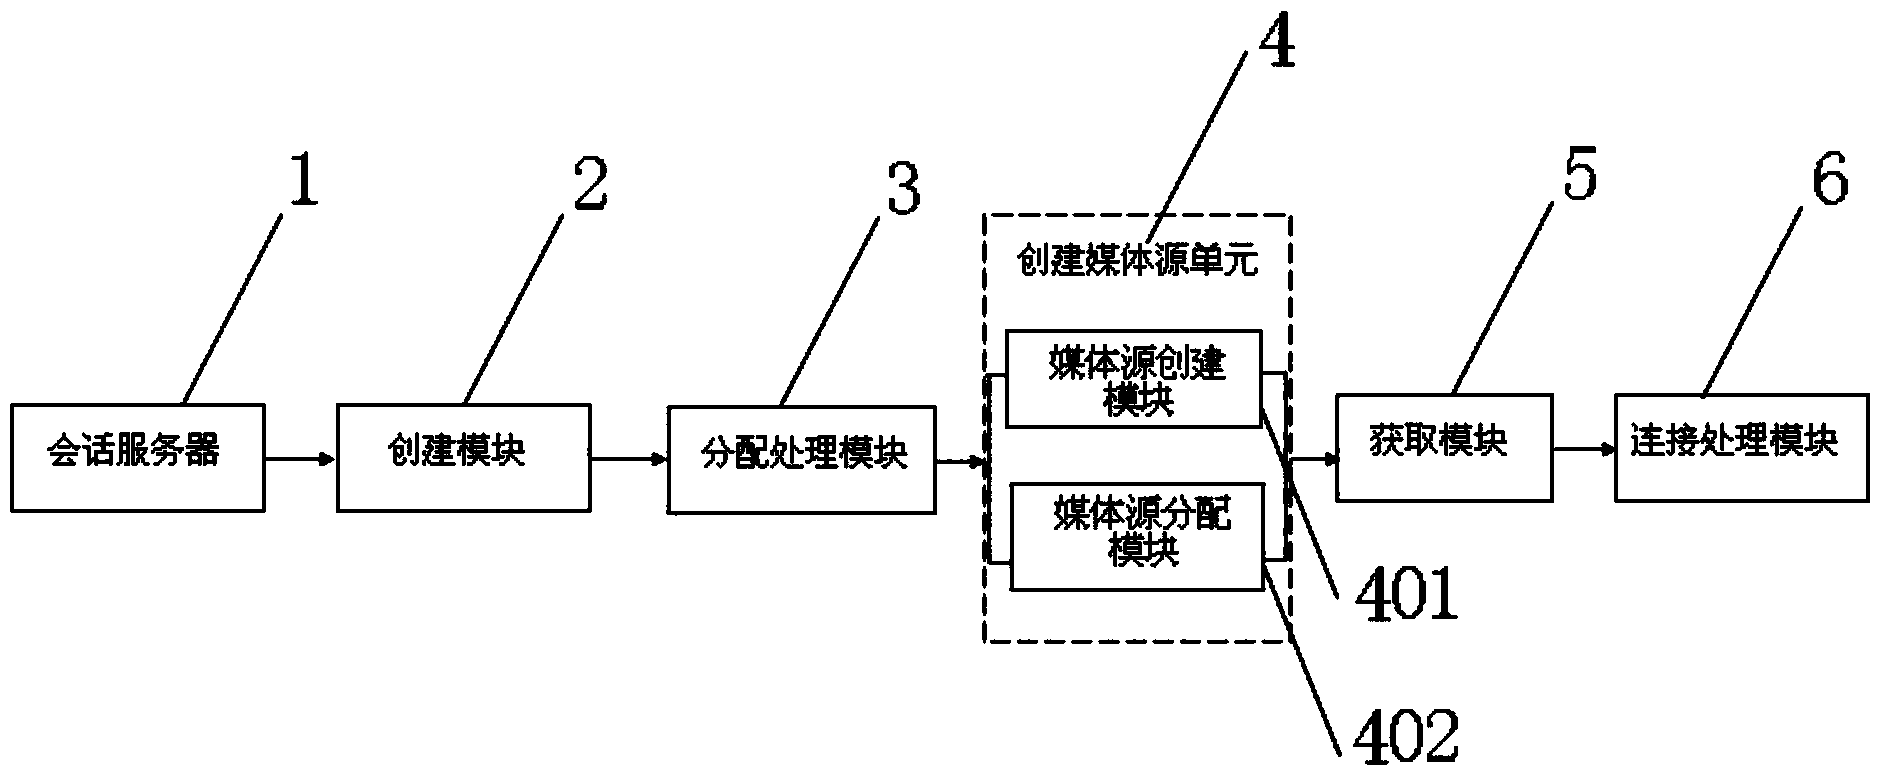 Method and system for achieving multiple-user communication through point-to-point real-time media communication scheme